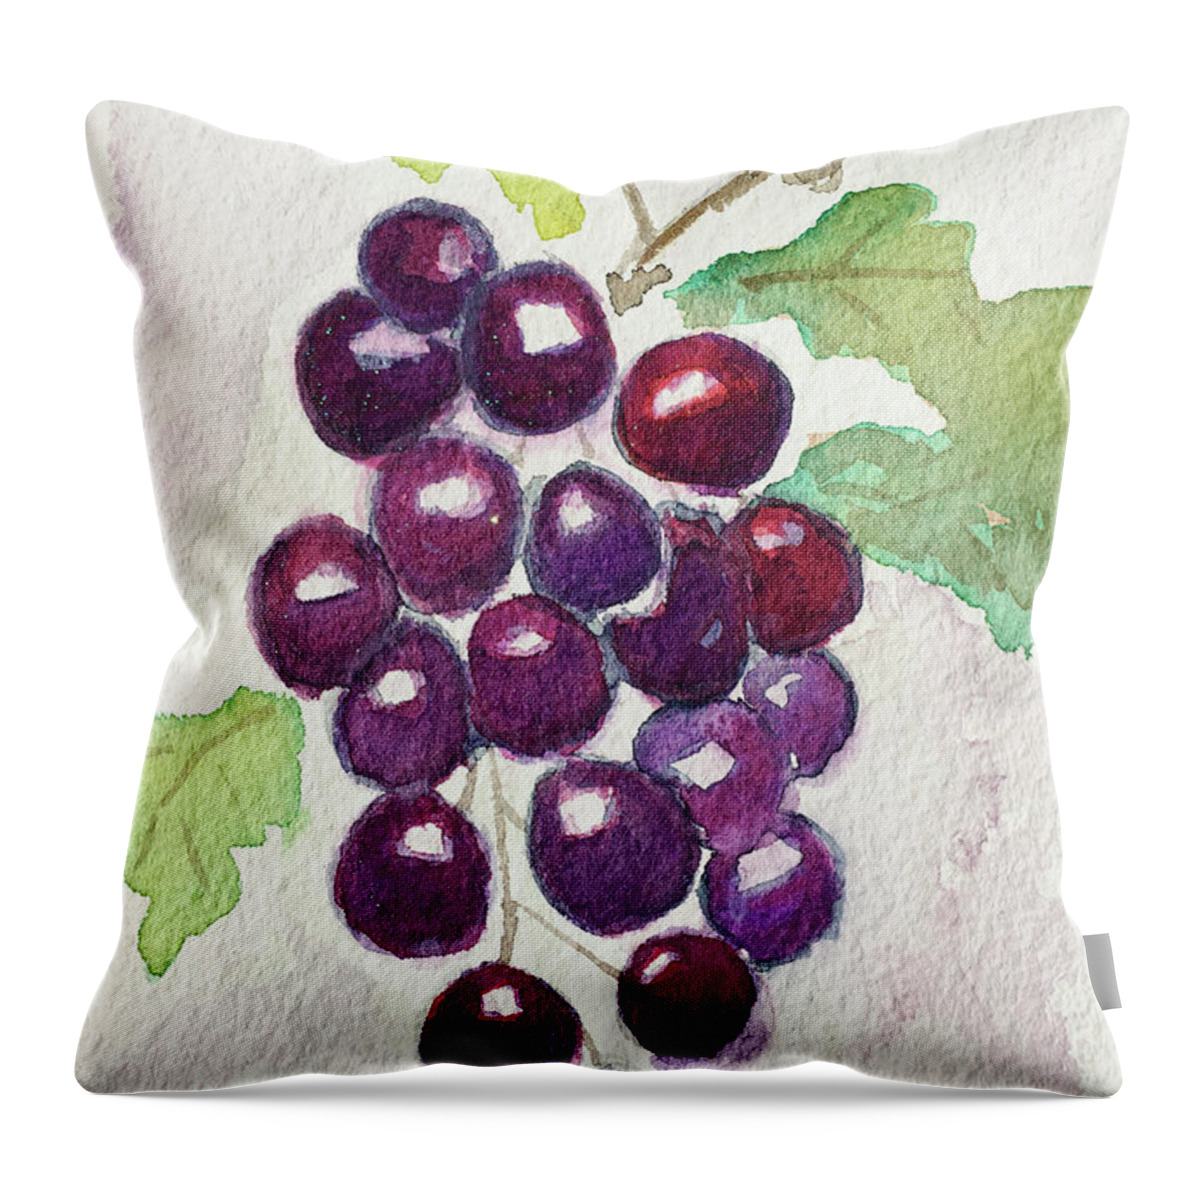 Grapes Throw Pillow featuring the painting Grapes by Roxy Rich